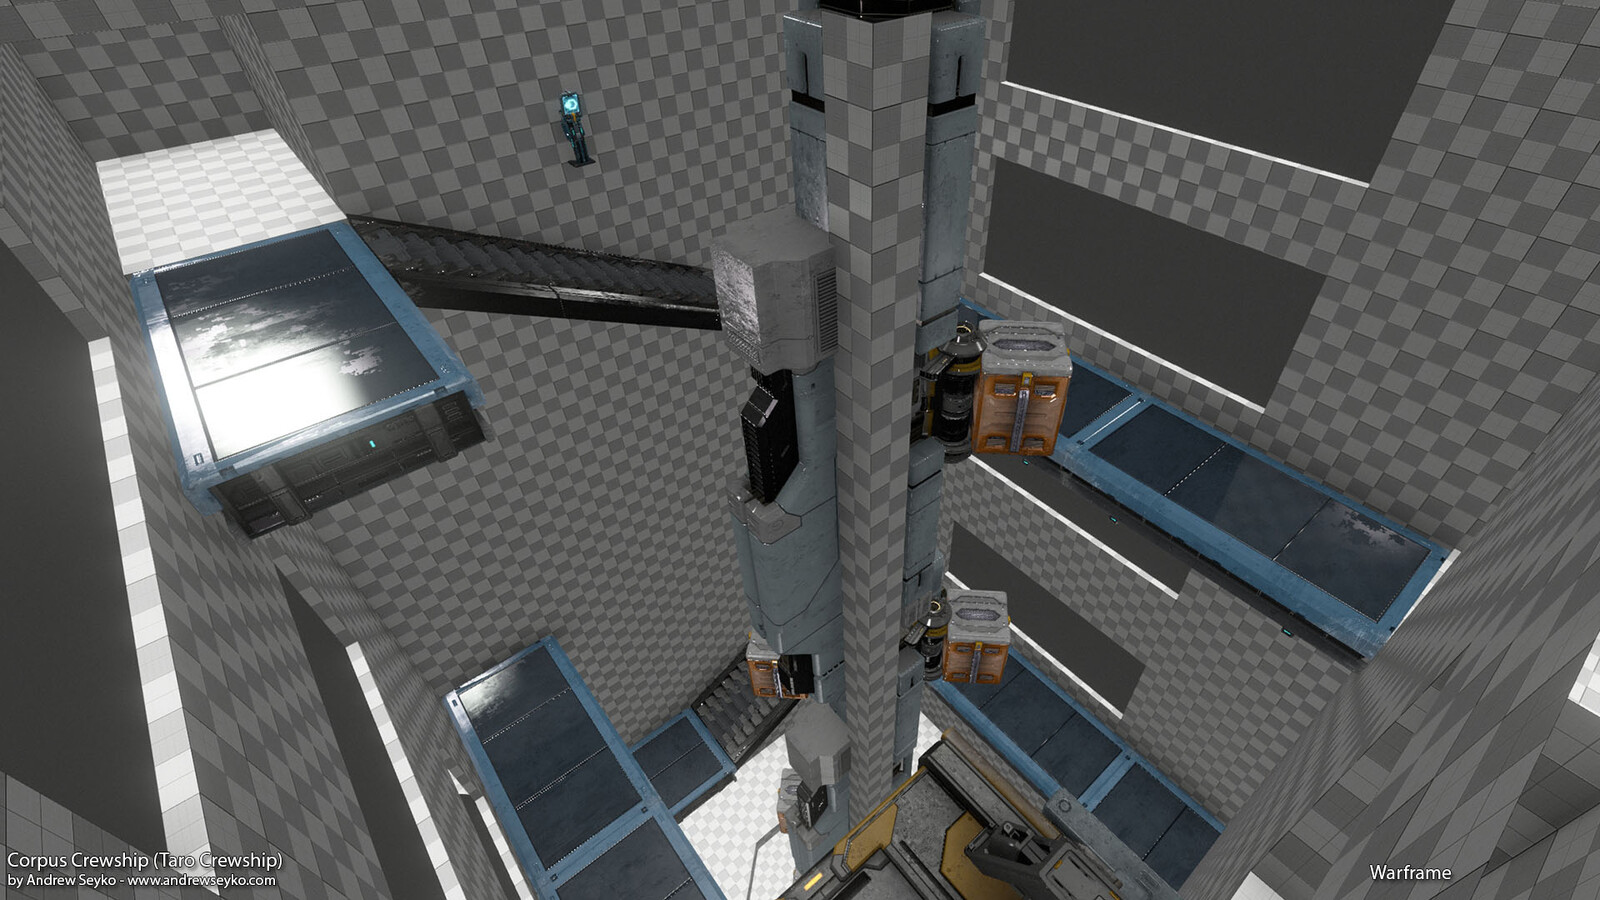 Early CSG Blockout of the Crewship. Early on, it was very compact and had rotating cargo in the middle as a traversal obstacle. 